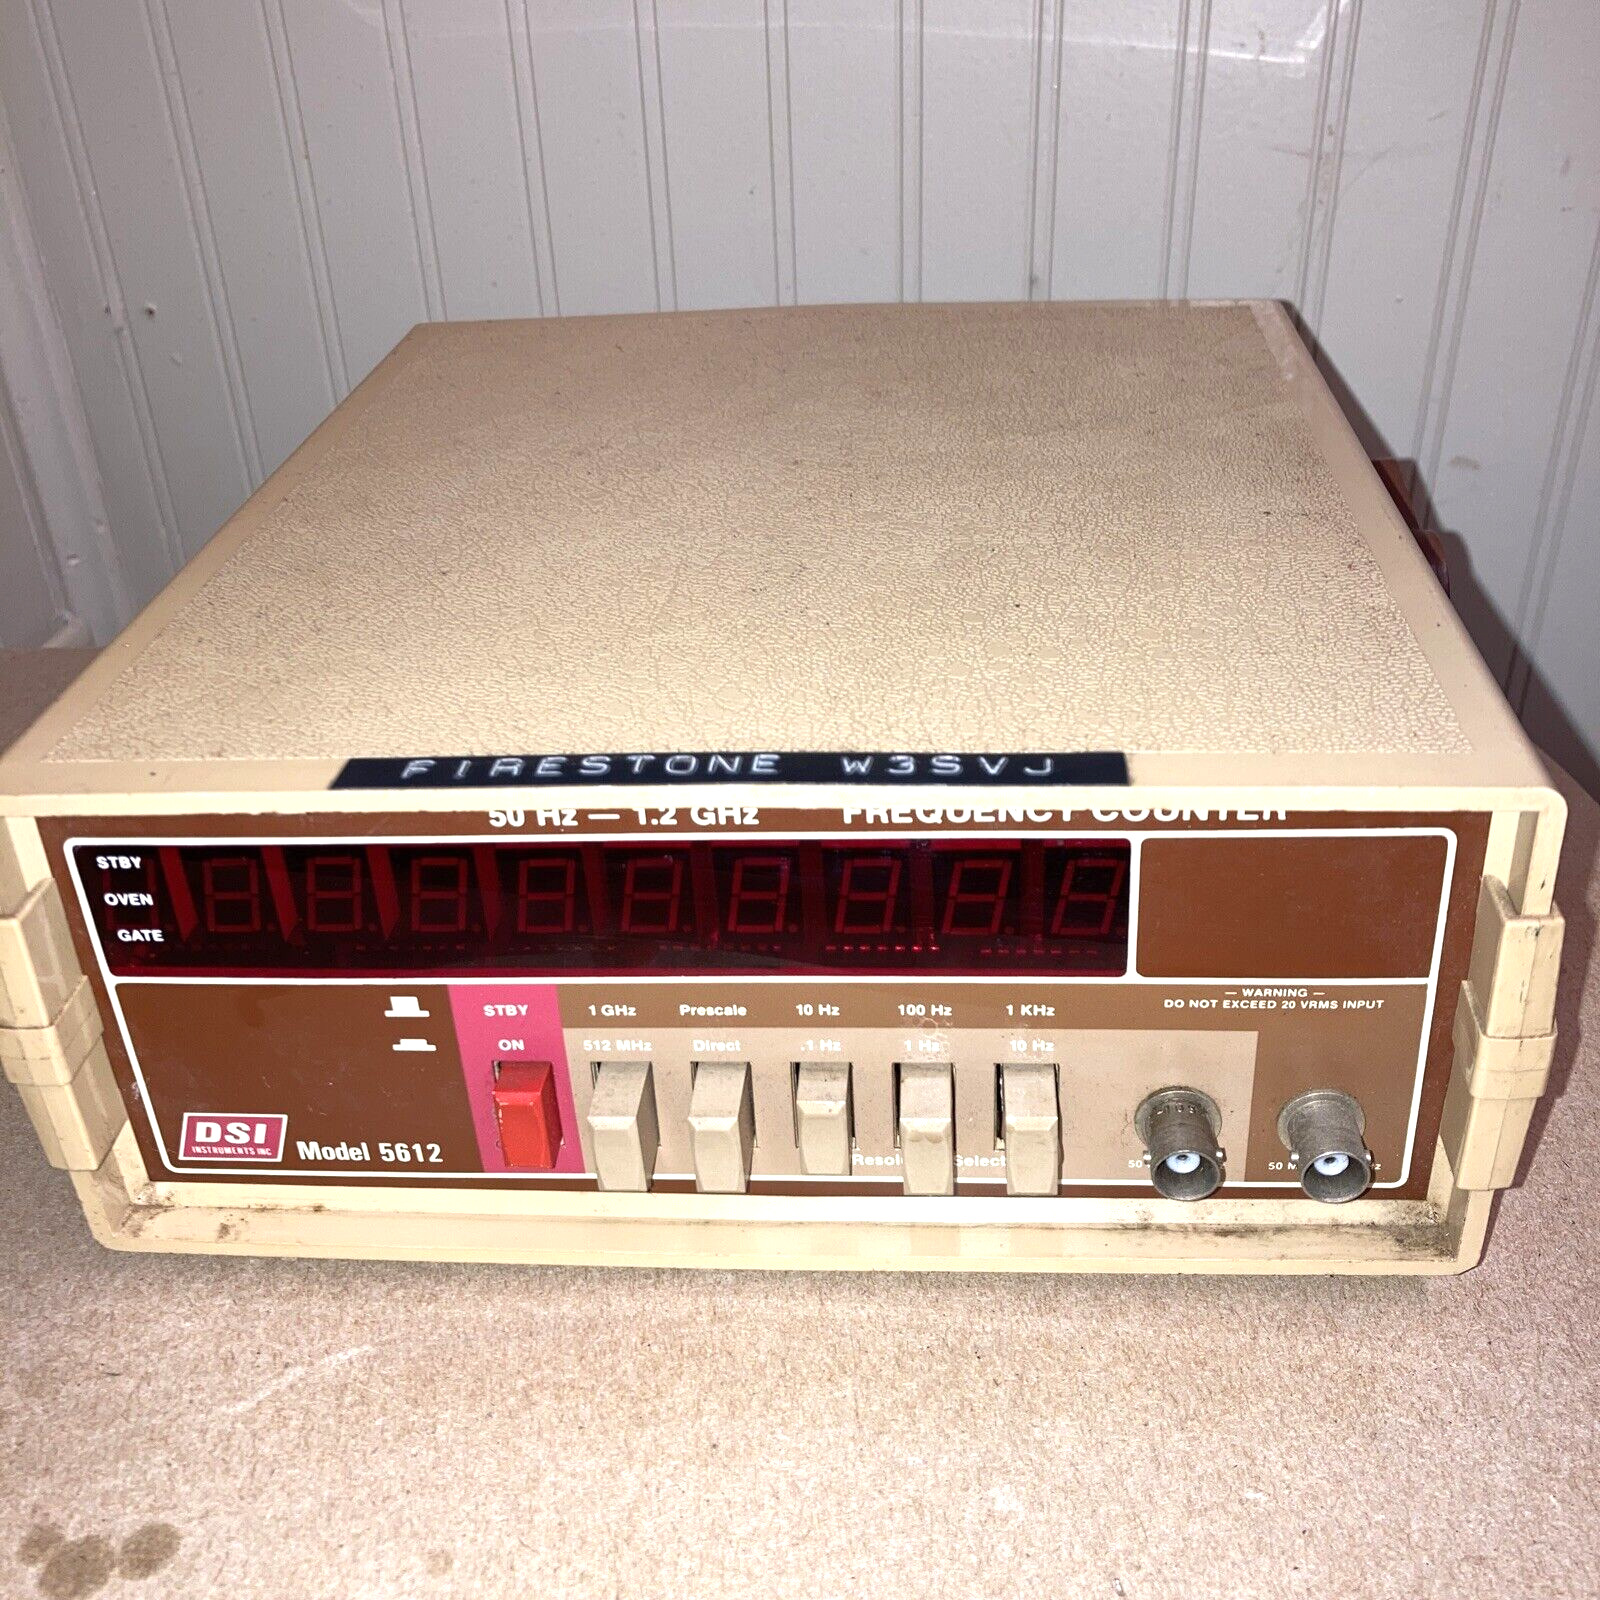 DSI Instruments Inc Model 5612 Frequency Counter - from Ham radio estate